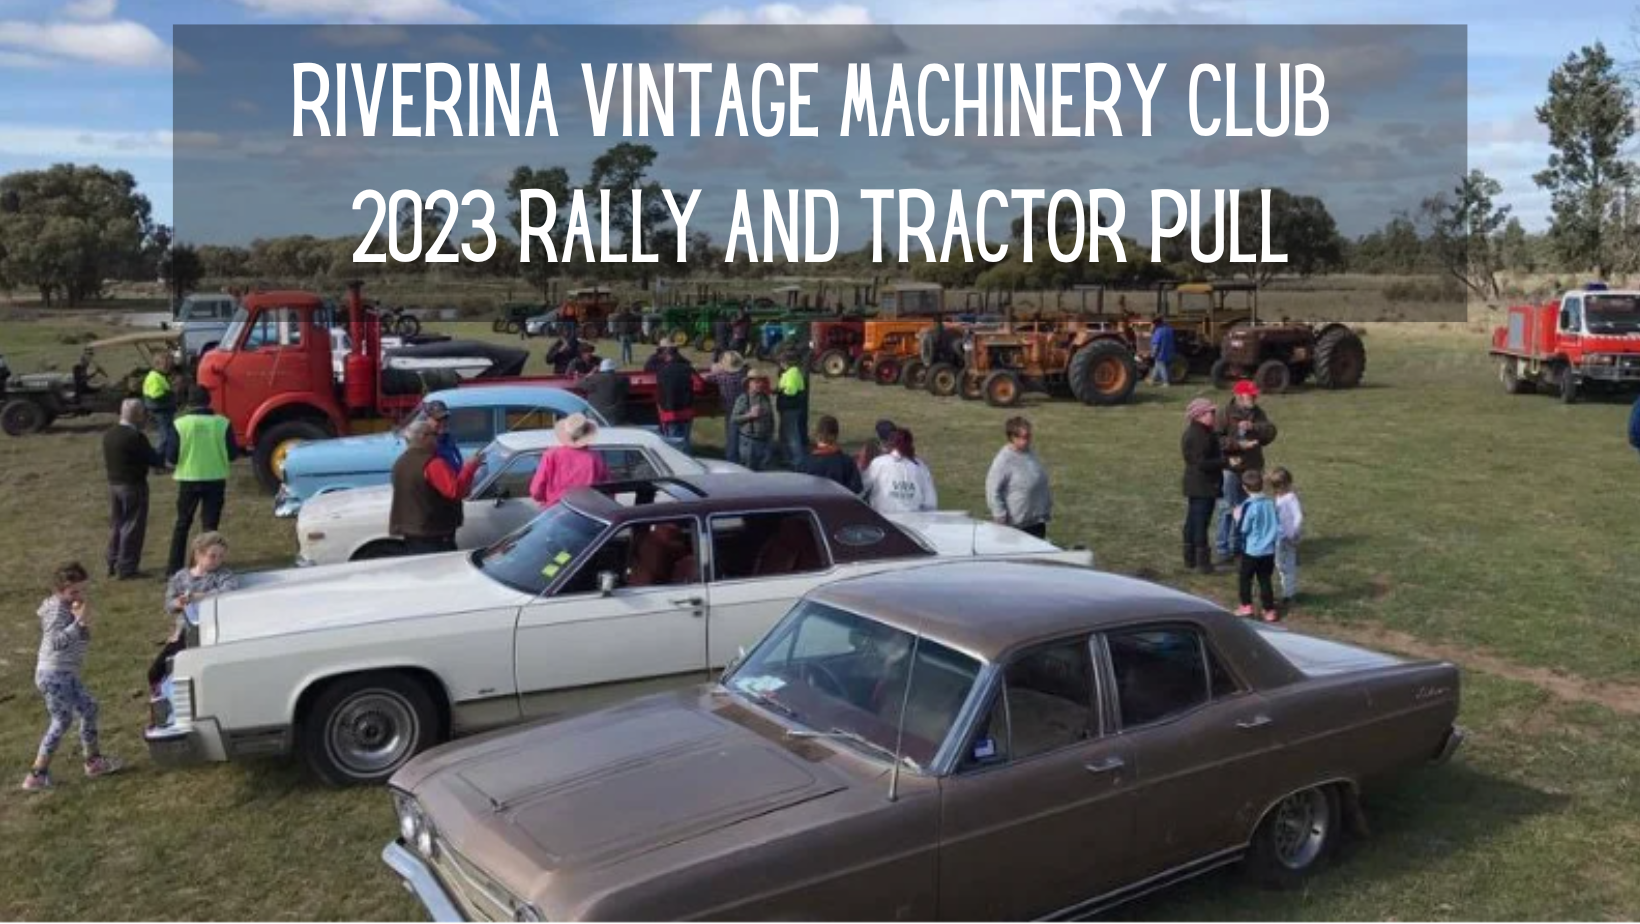 RIVERINA VINTAGE MACHINERY CLUB RALLY AND TRACTOR PULL